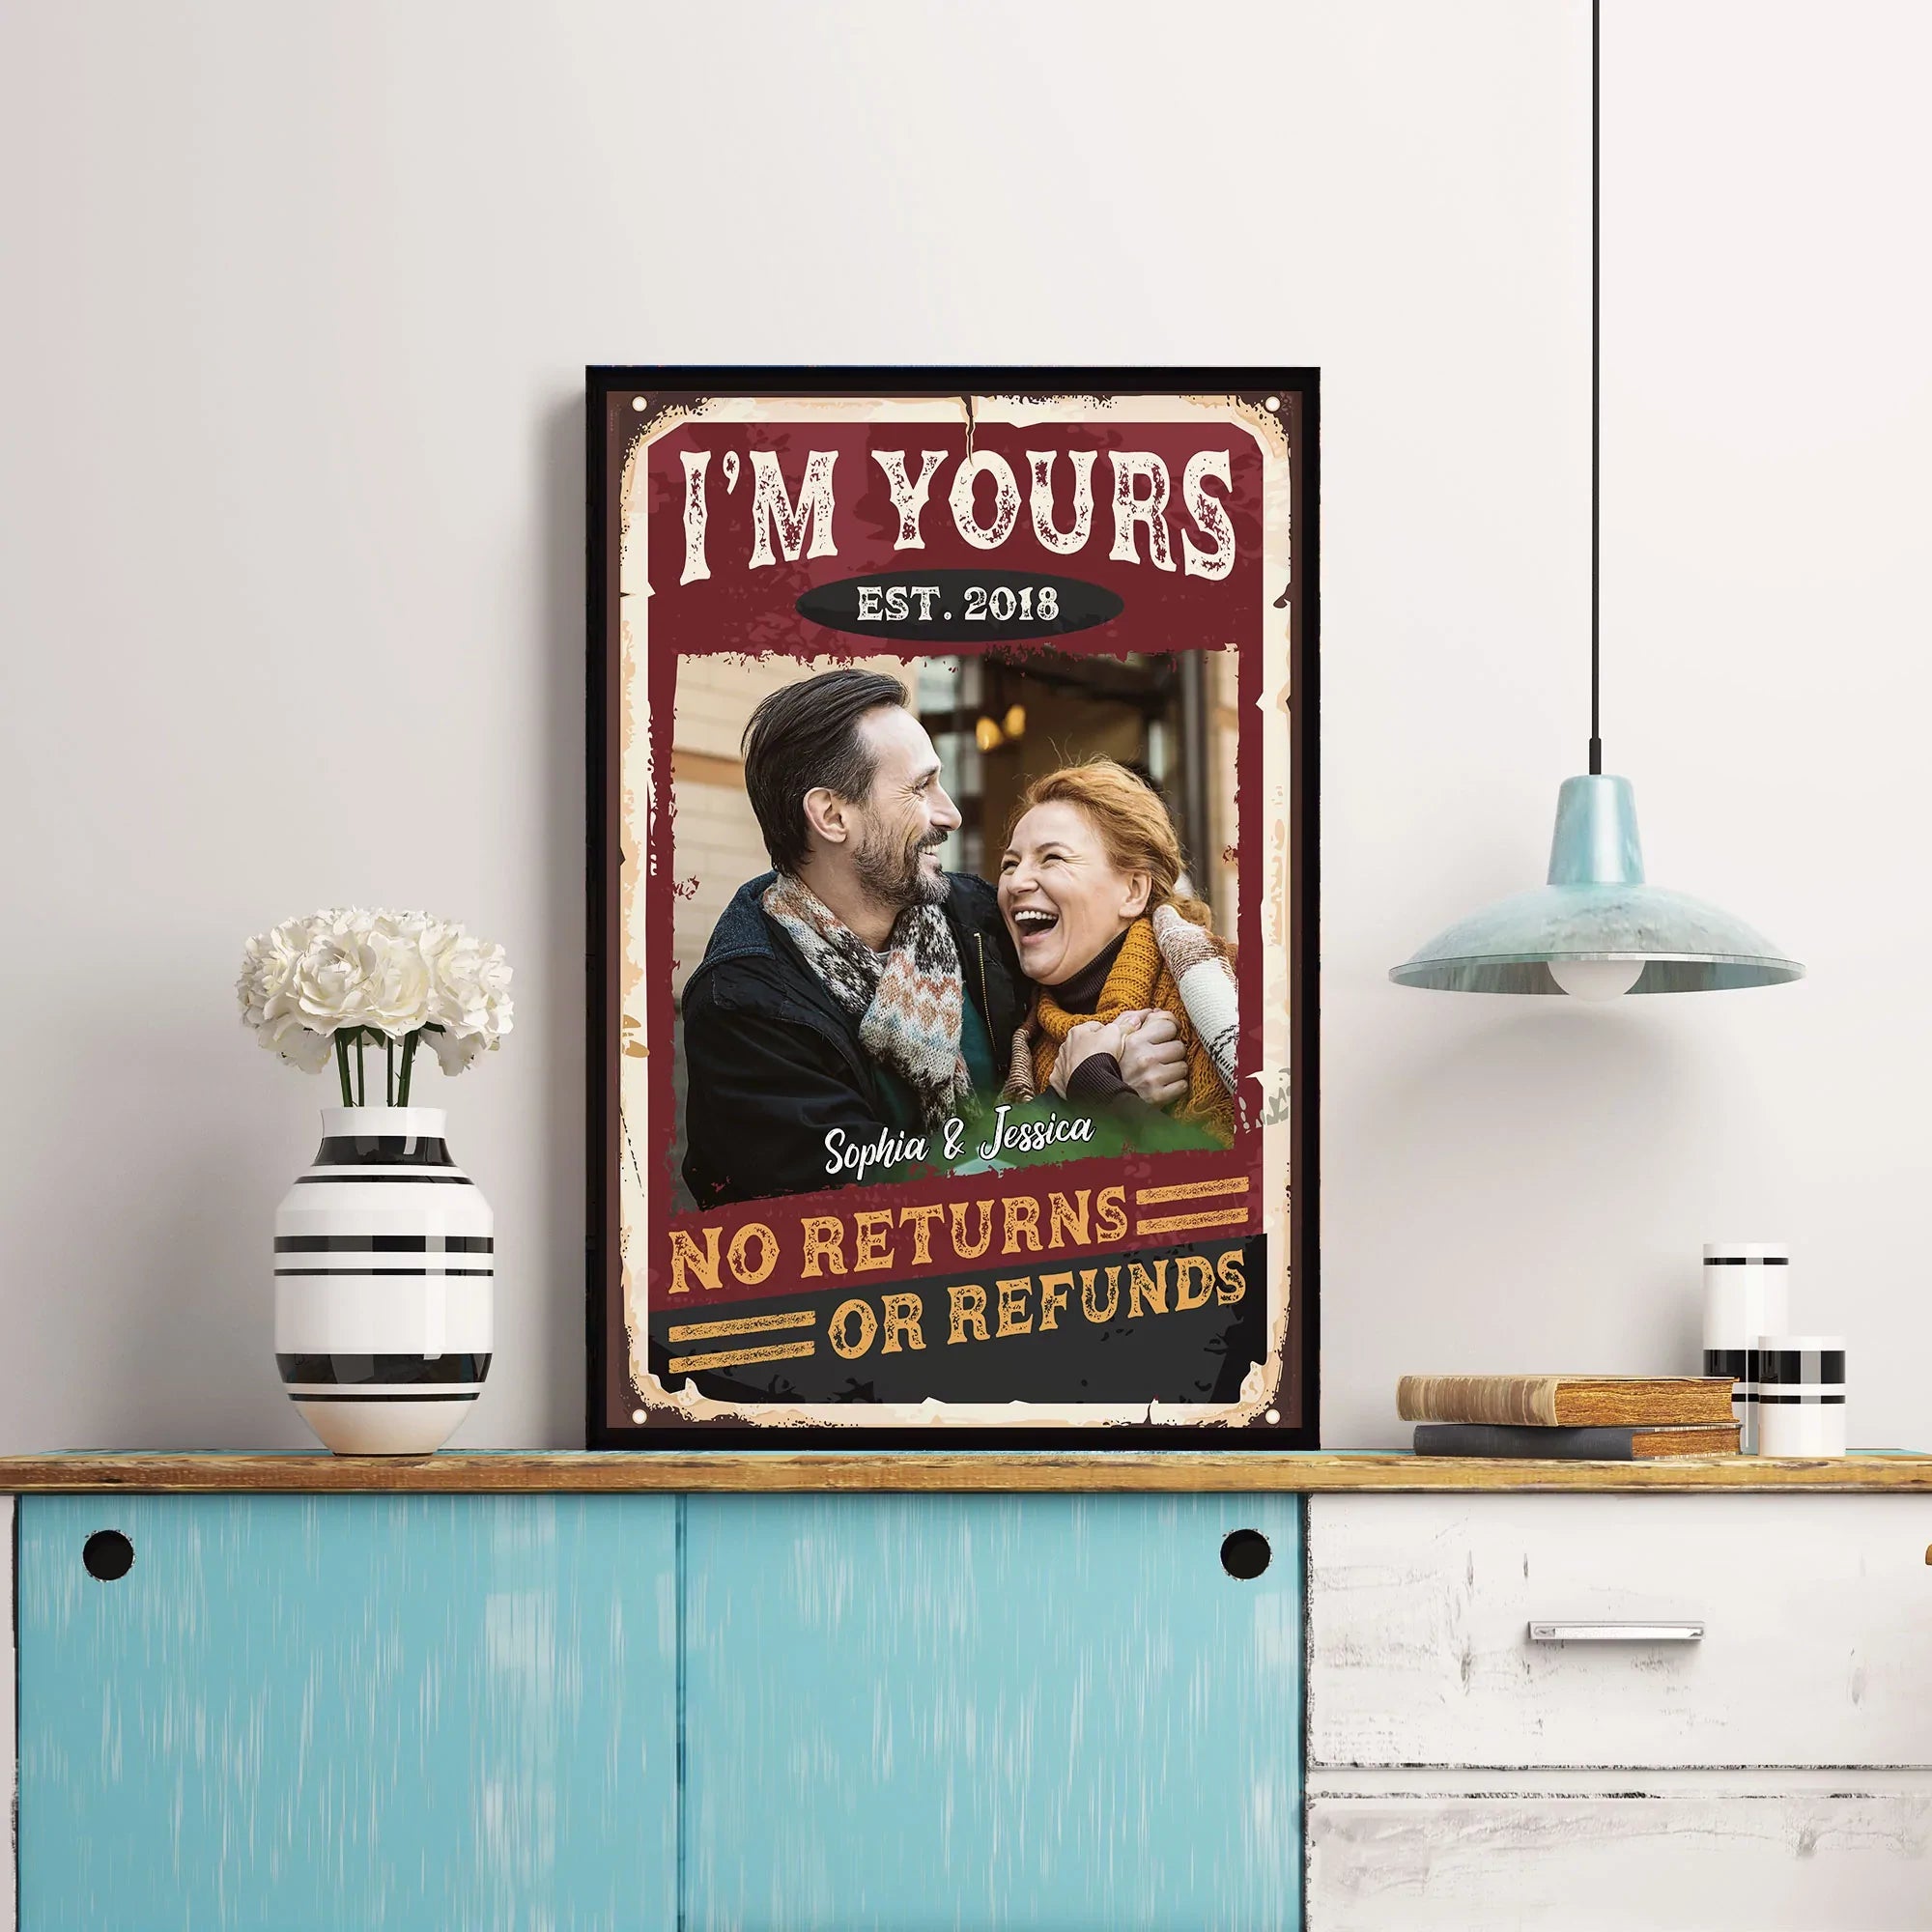 No Returns Or Refunds - Personalized Poster/Canvas - Anniversary, Valentine, Birthday Gift For Spouse, Husband, Wife, Boyfriend, Girlfriend